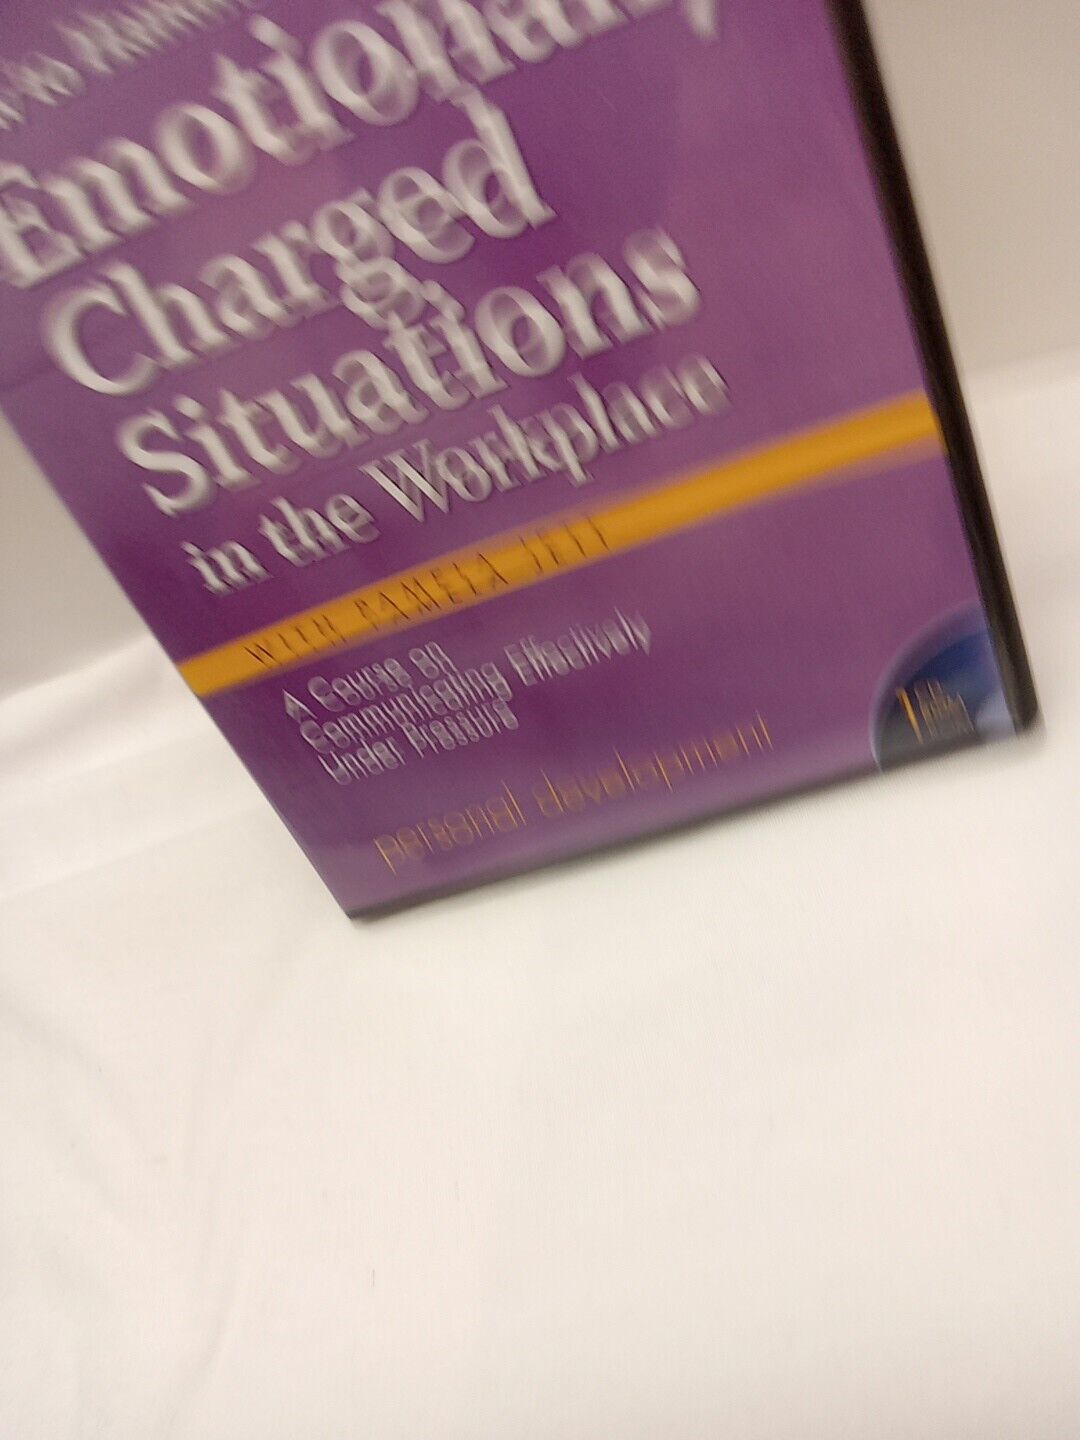 Star12 - How To Handle Emotionally Charged Situations in the Workplace (CD-ROM)